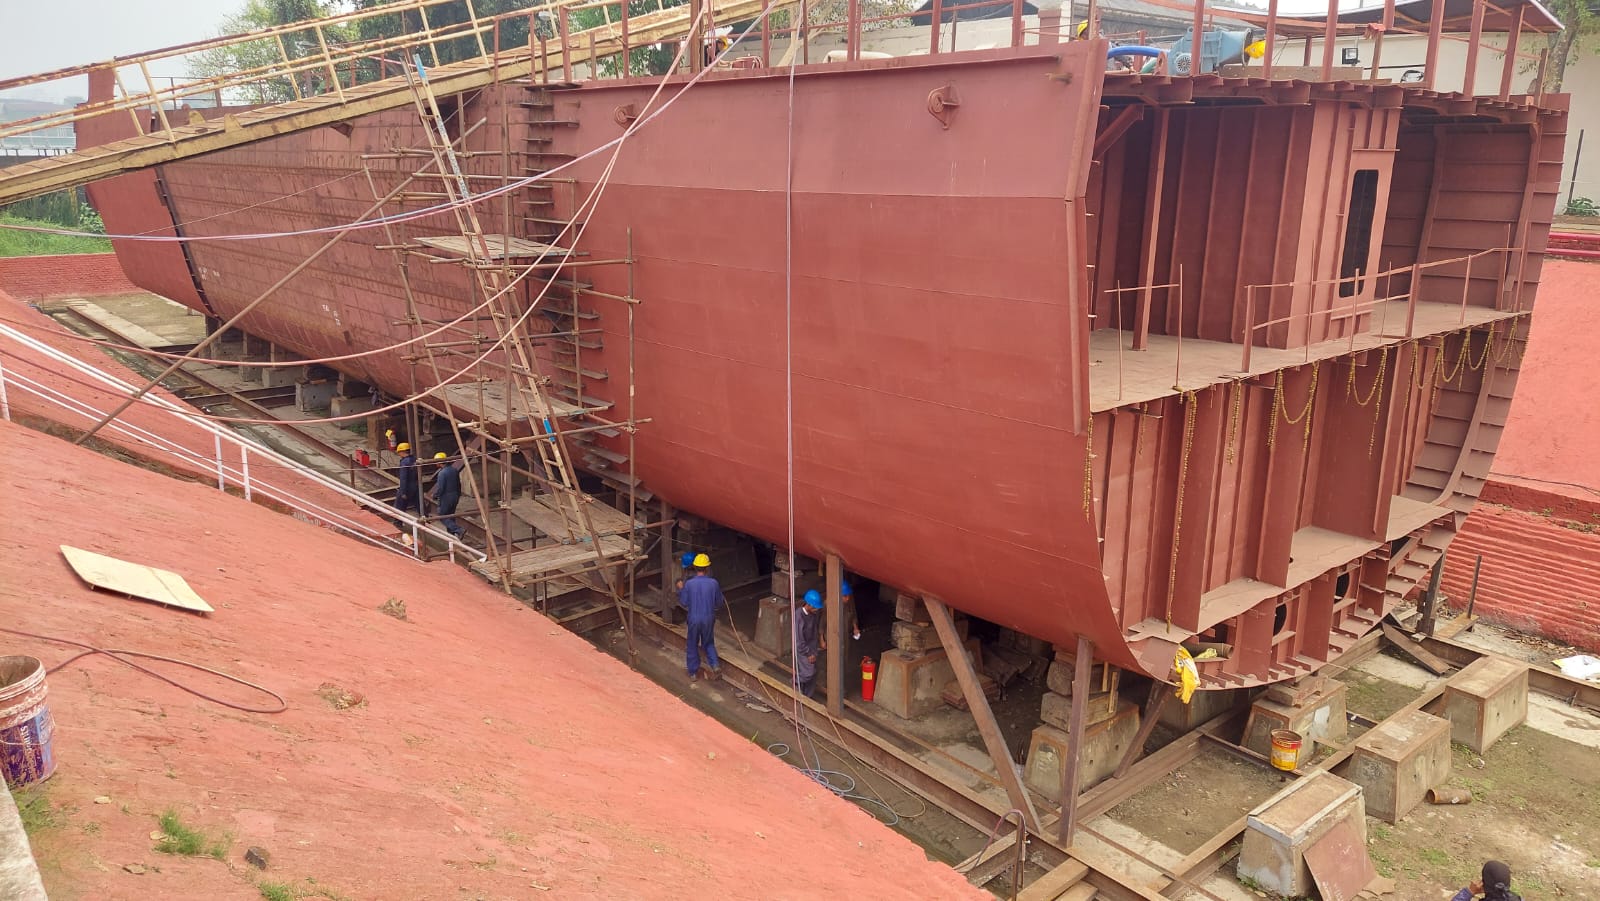 Image 1 - 50% Keel Blocks Lowering achieved for Yard 3033 & 3036 at DD1, RBD on 17 Mar 23